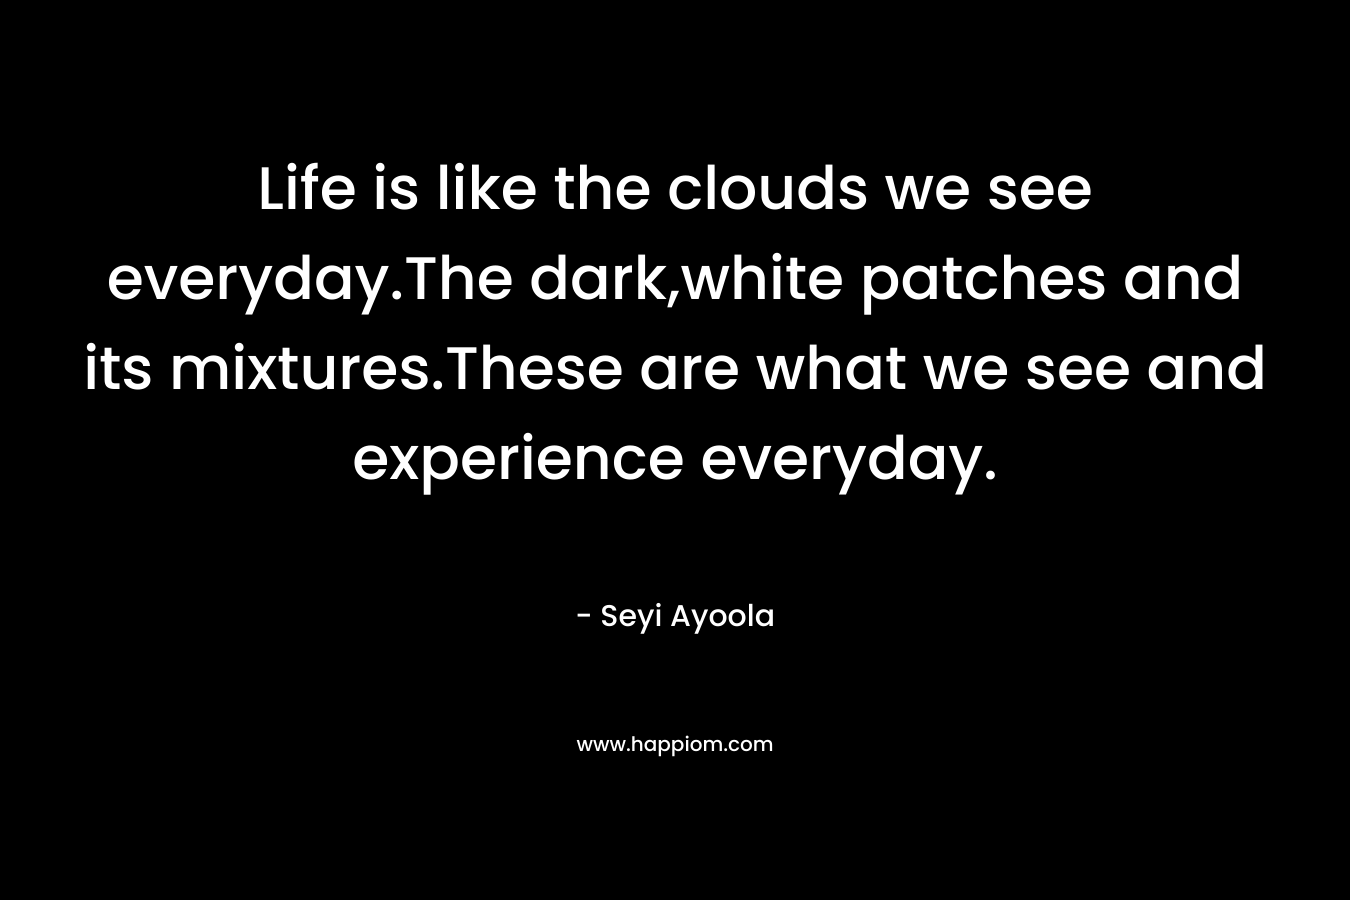 Life is like the clouds we see everyday.The dark,white patches and its mixtures.These are what we see and experience everyday.